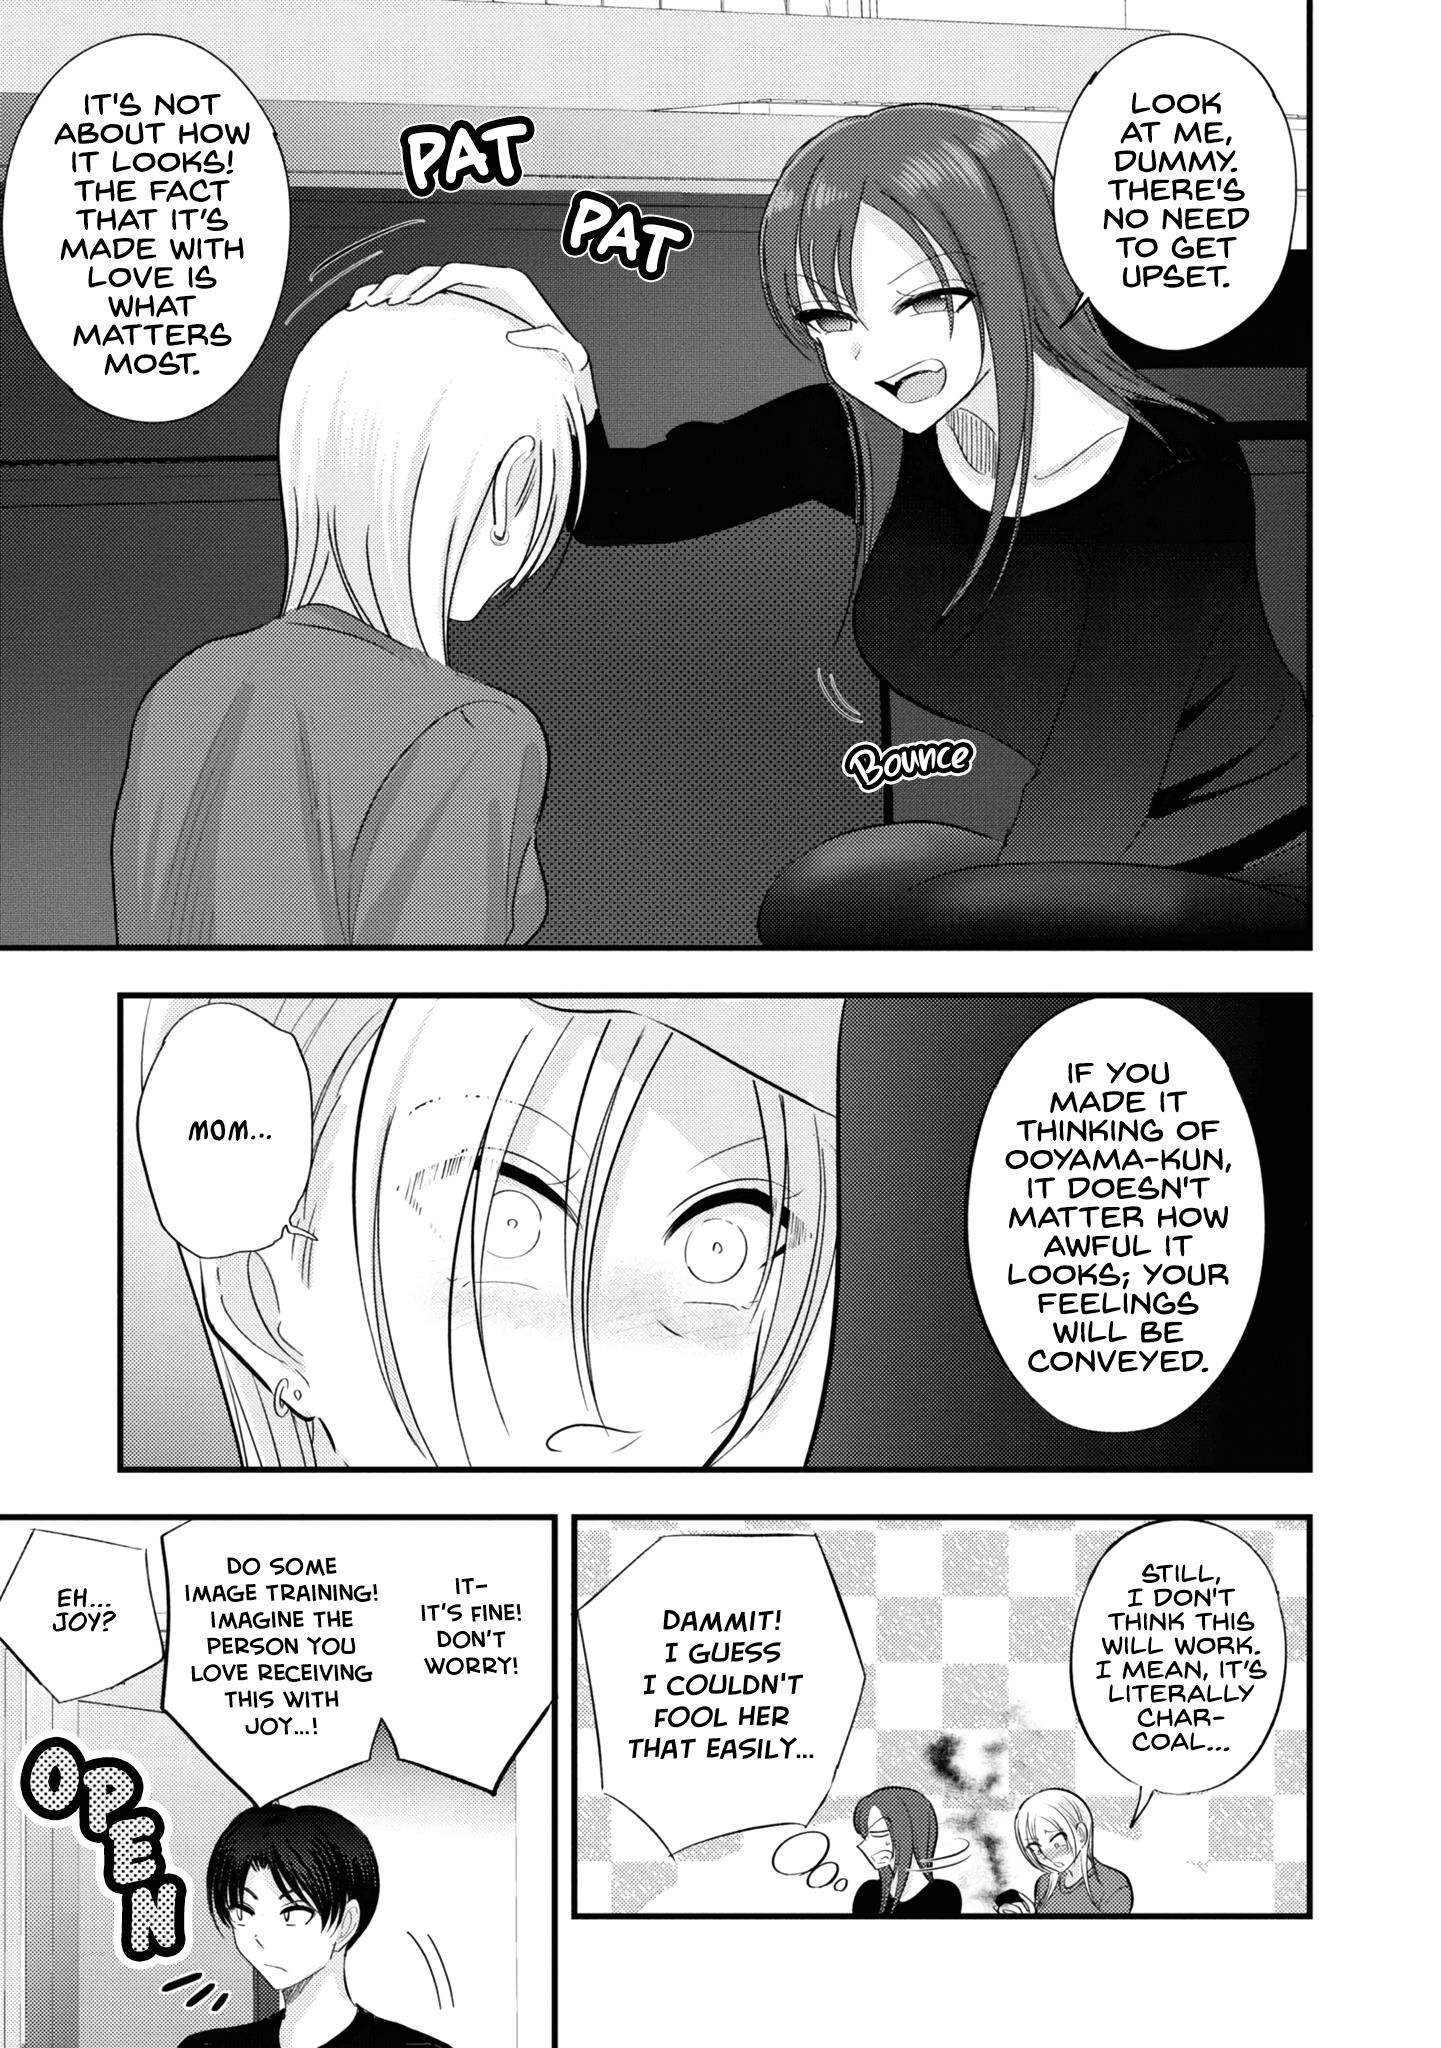 Please Go Home, Akutsu-San! Vol.7 Chapter 141.1: Extra 1 - Picture 3